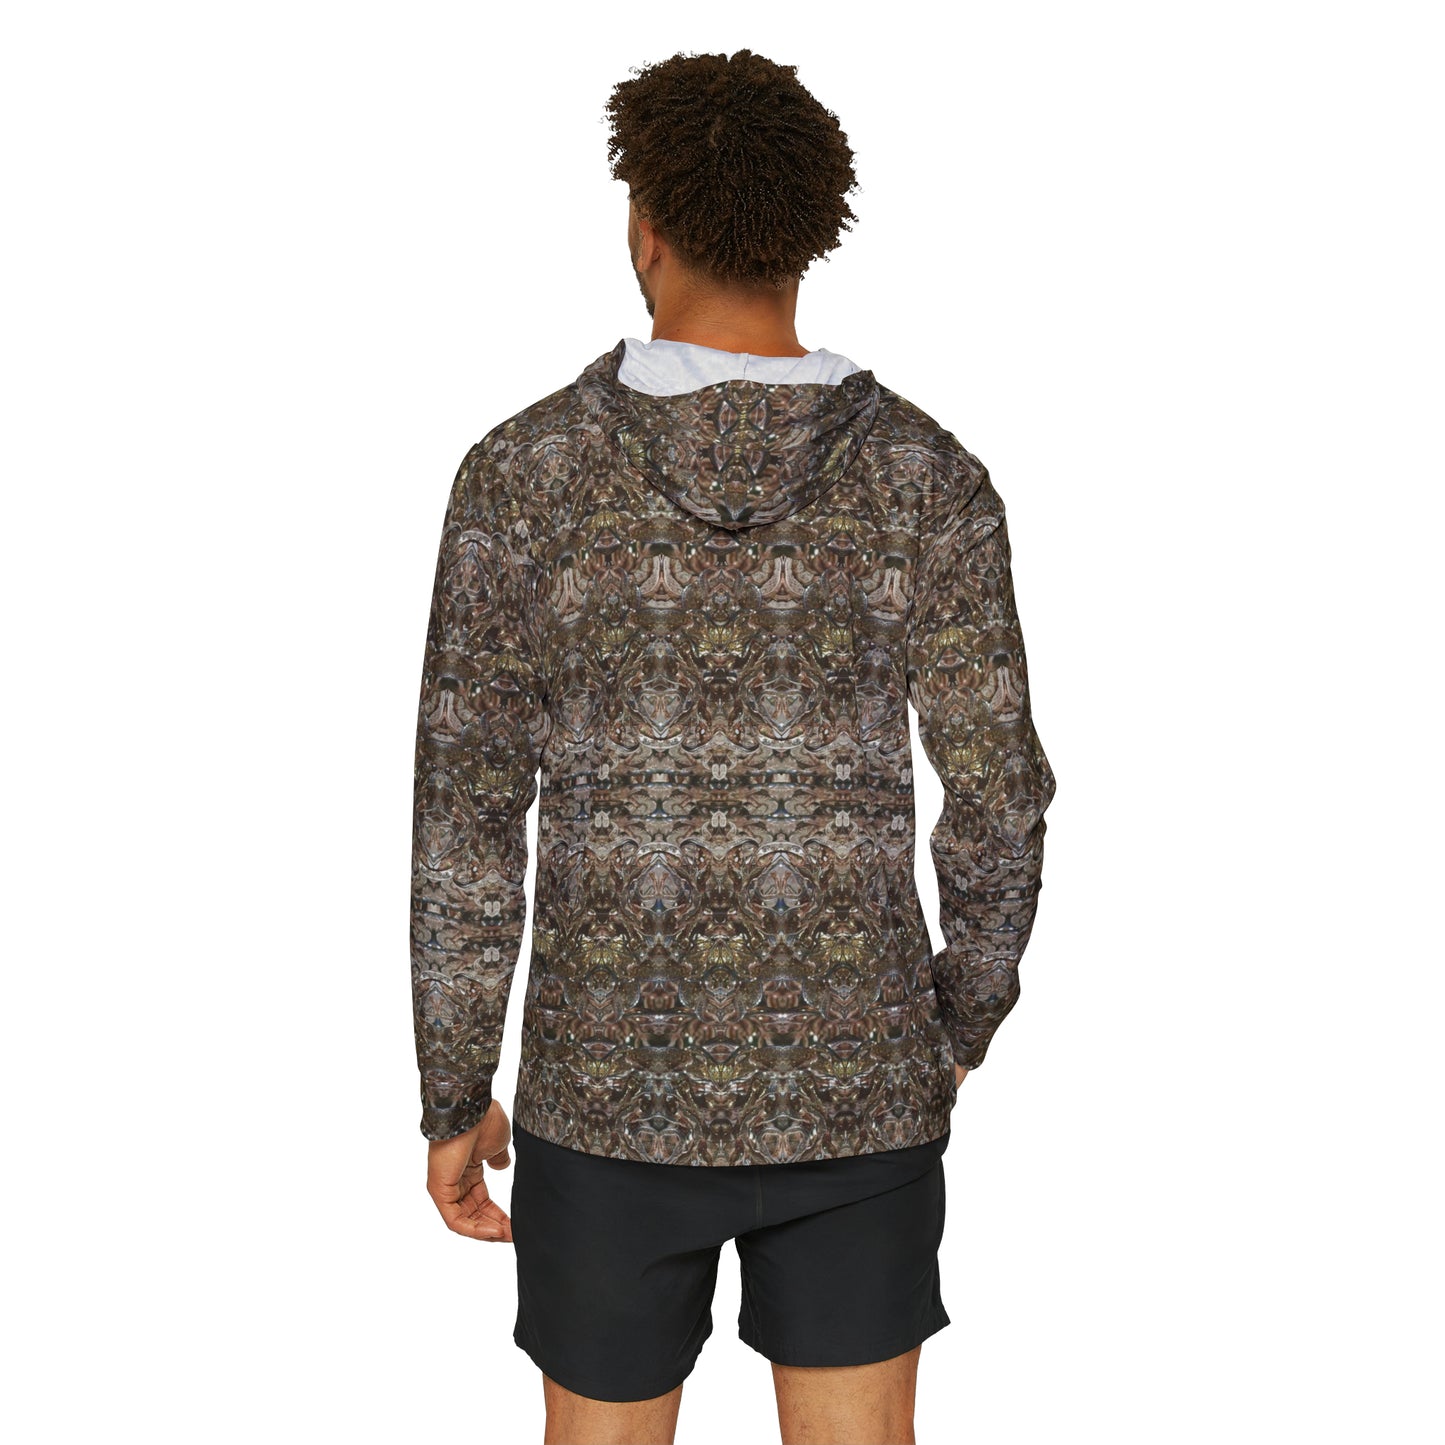 Athletic Activewear Hoodie (His/They) (Samhain Dream Thaw 13 of 15@Ouroboros Smith Fabric) RJSTH@w2023 RJS